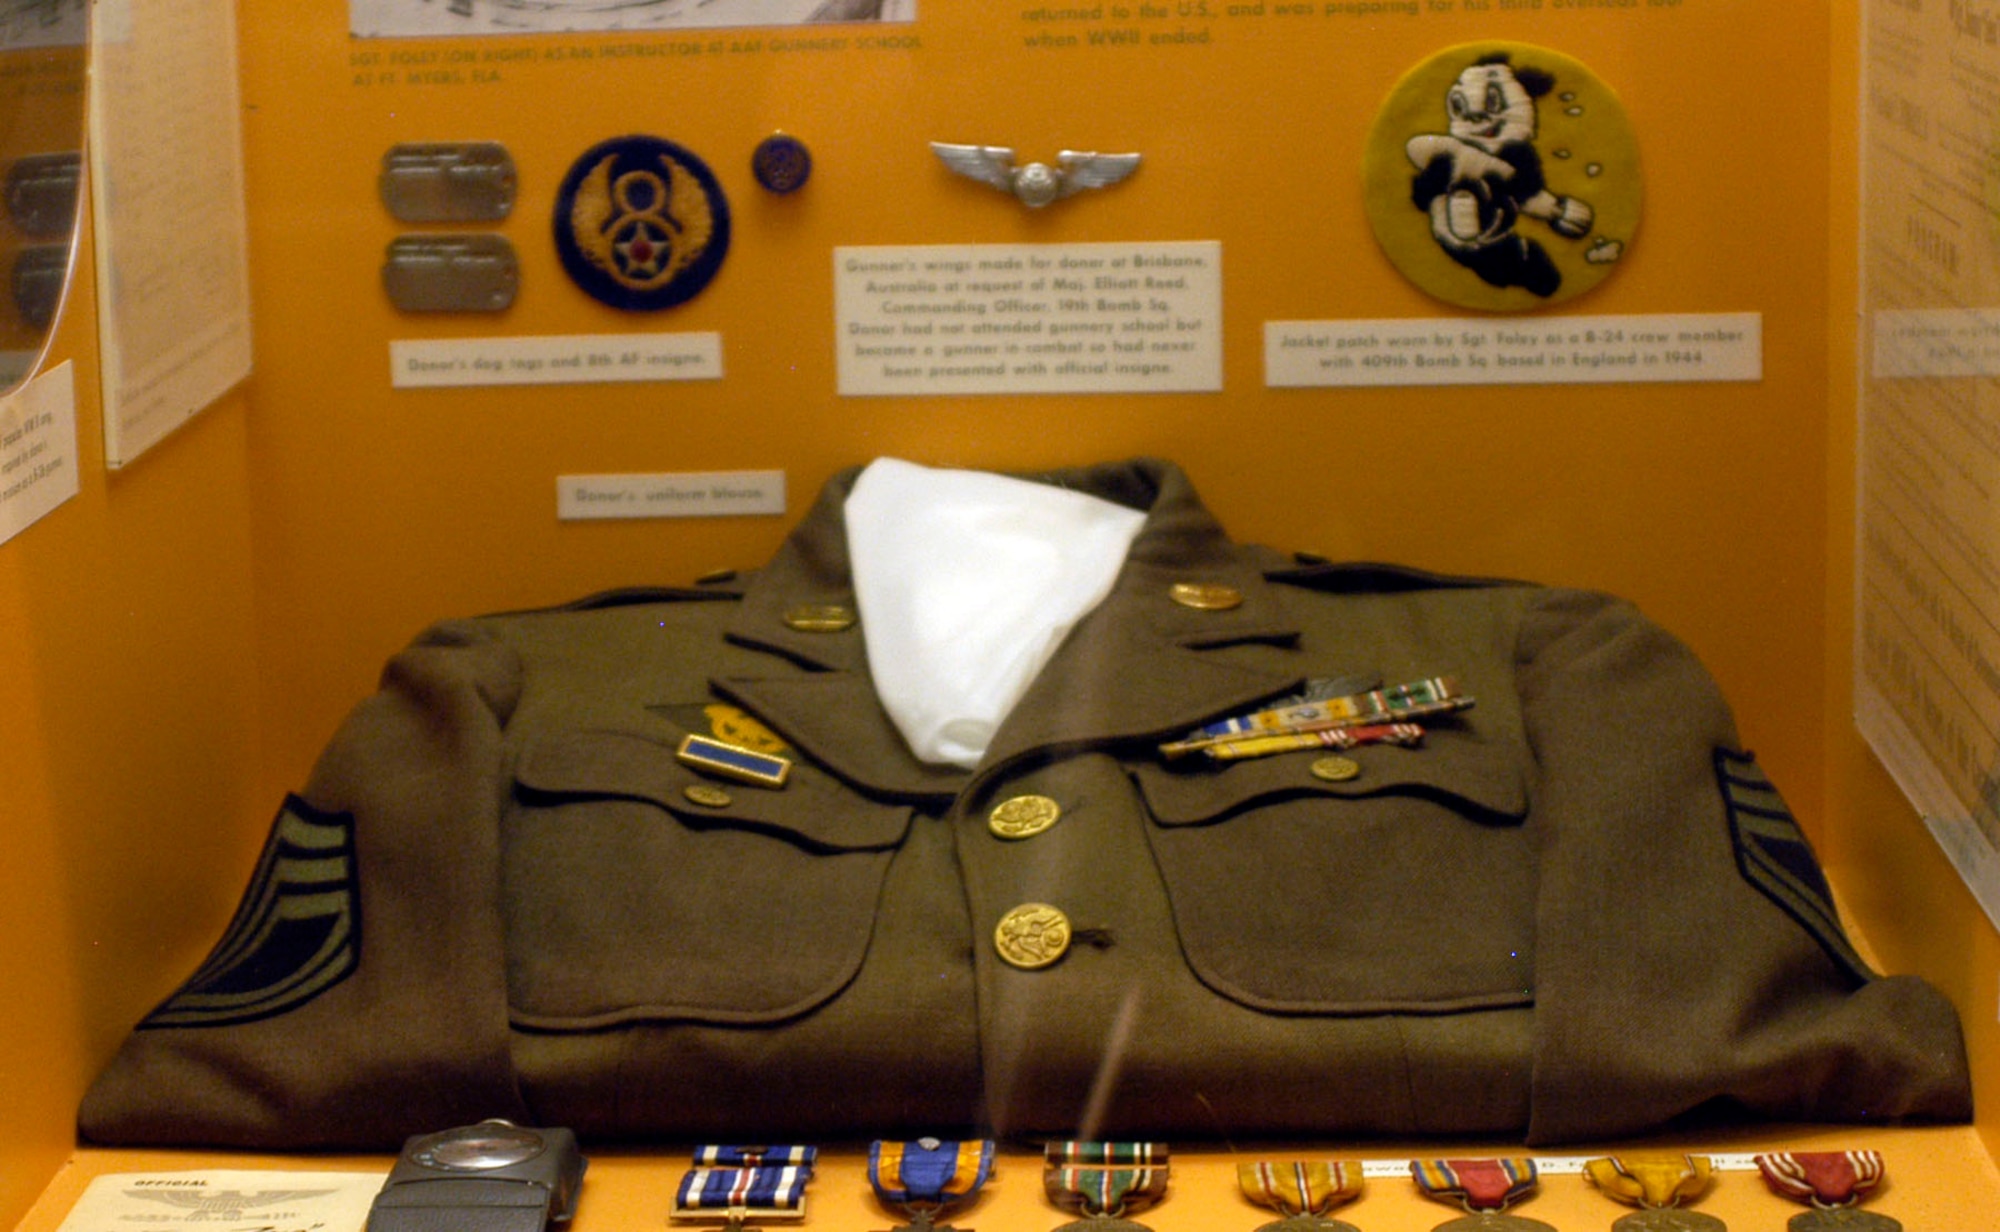 DAYTON, Ohio -- This uniform blouse donated by Sgt. John D. Foley, Banning, Calif., is on display in the World War II Gallery at the National Museum of the U.S. Air Force. (U.S. Air Force photo)